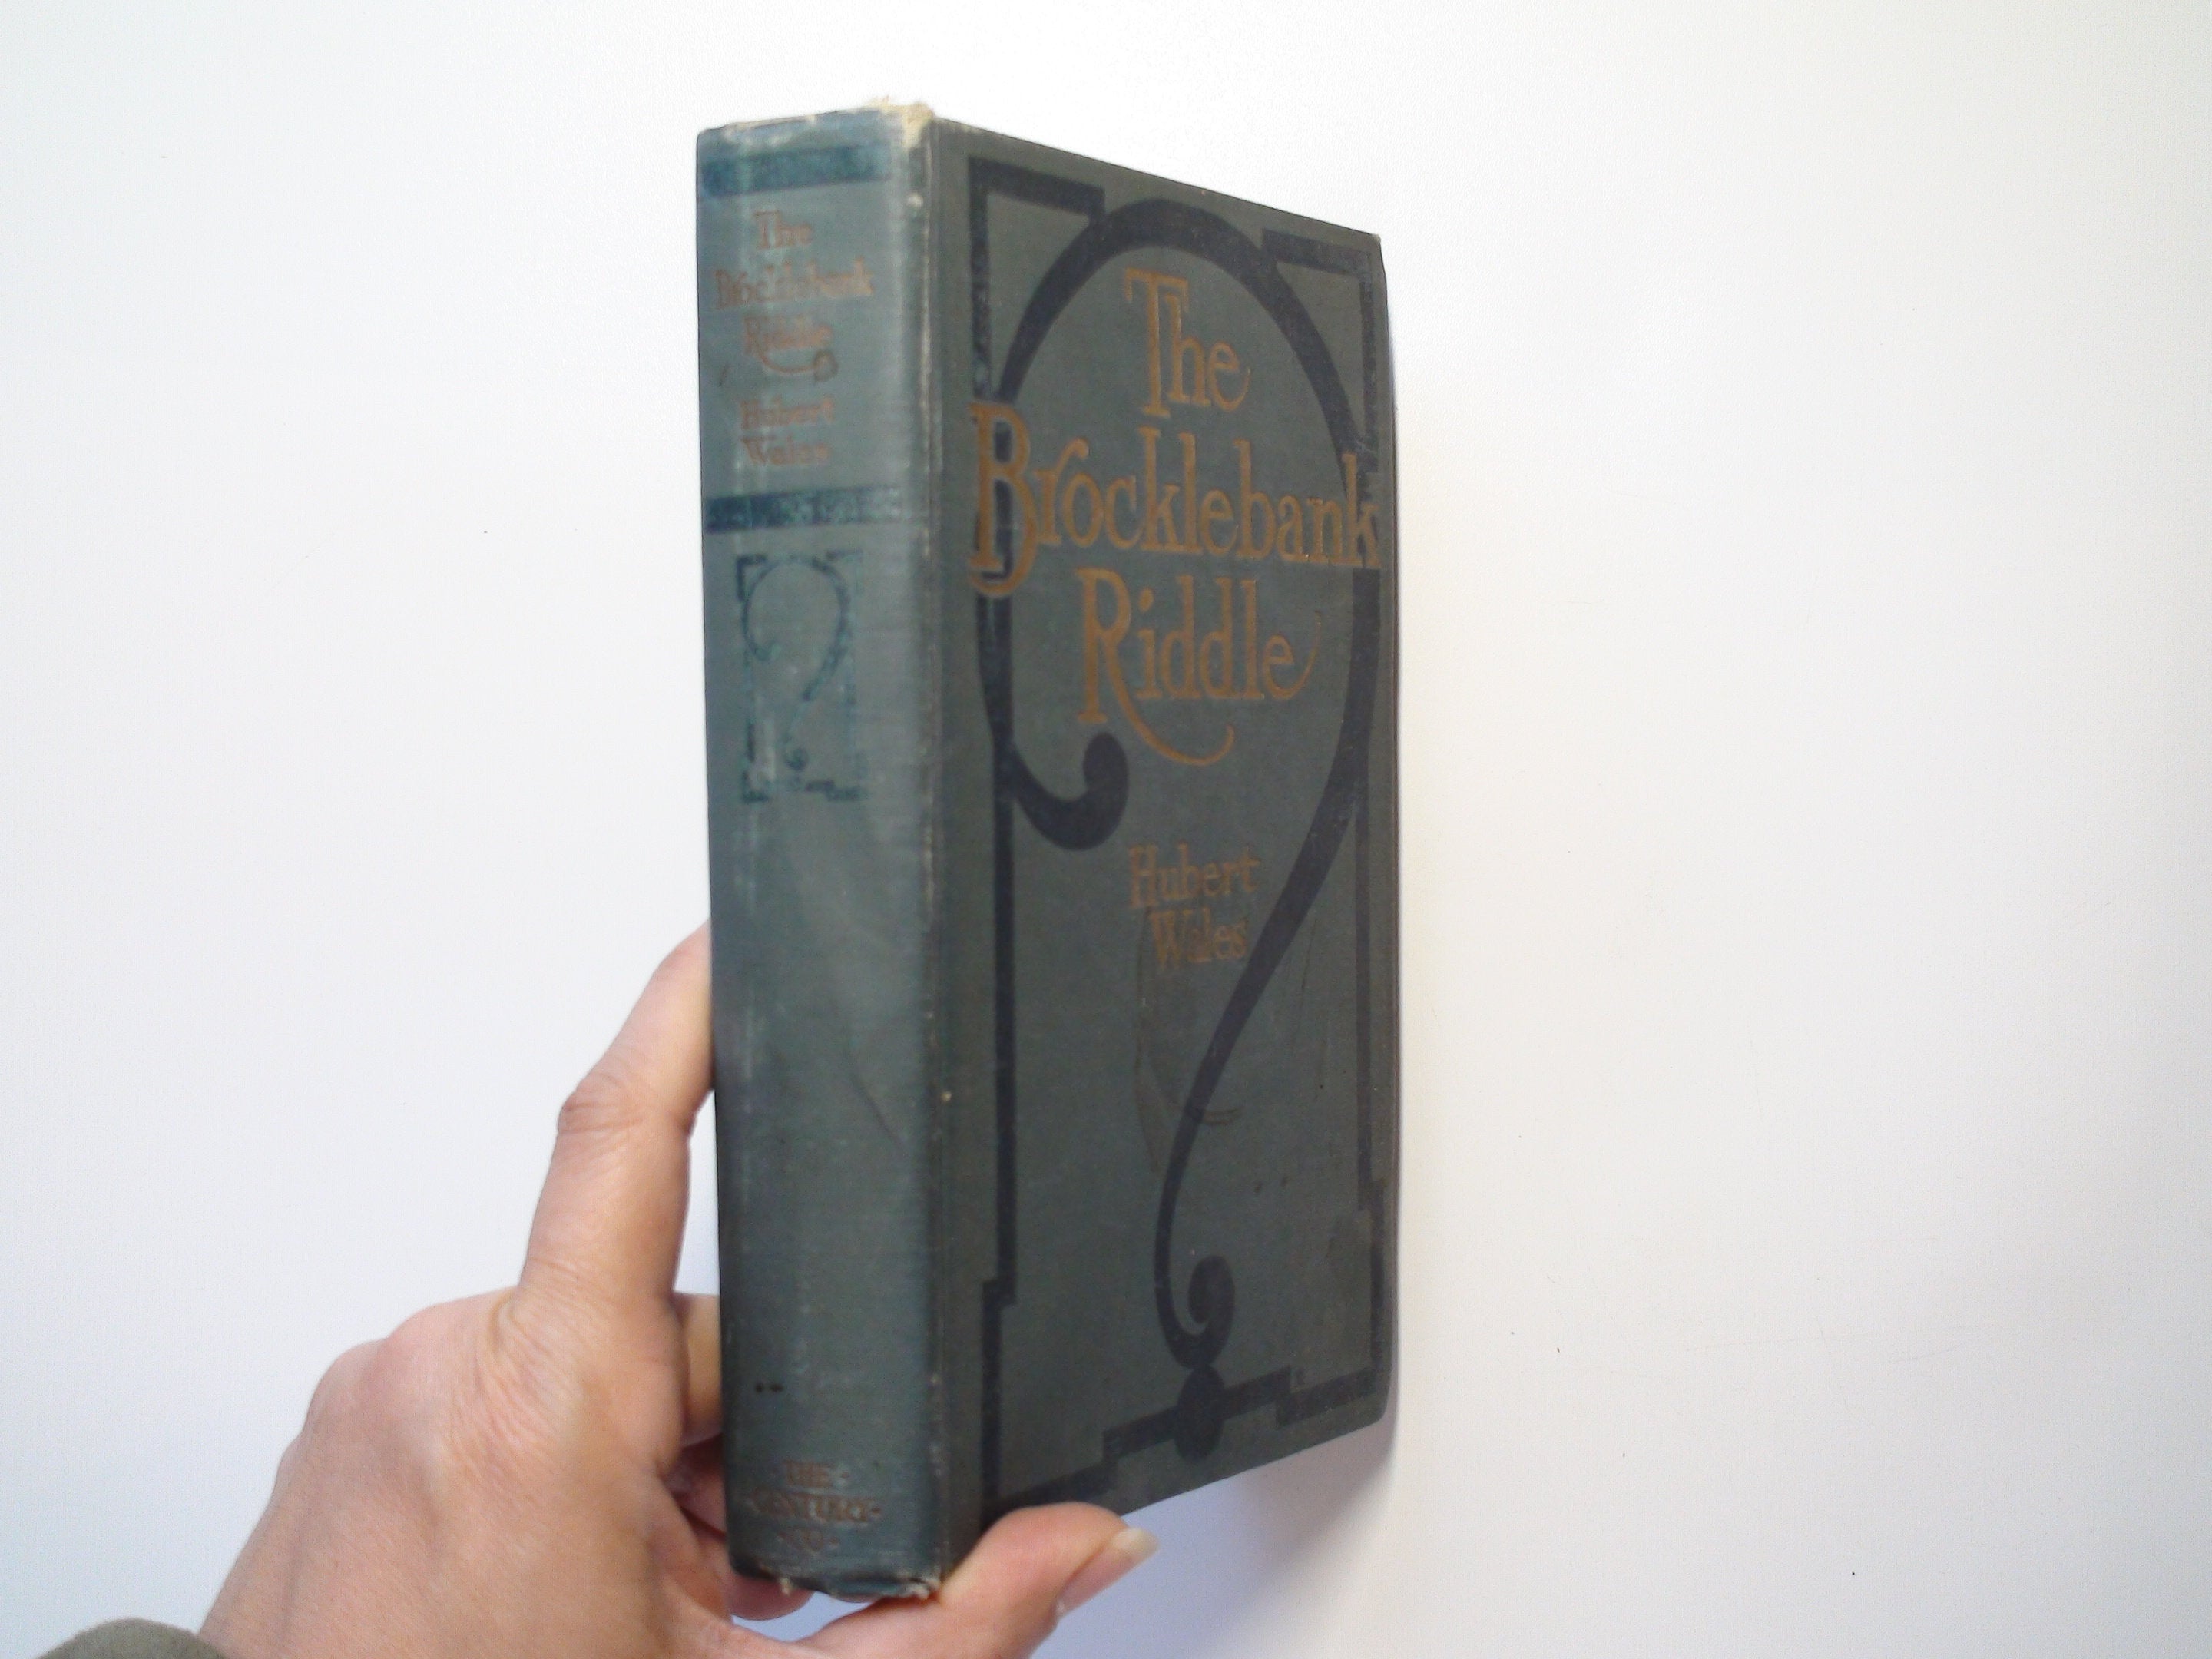 The Brocklebank Riddle, By Hubert Wales, 1st Ed, Occult Novel, 1914